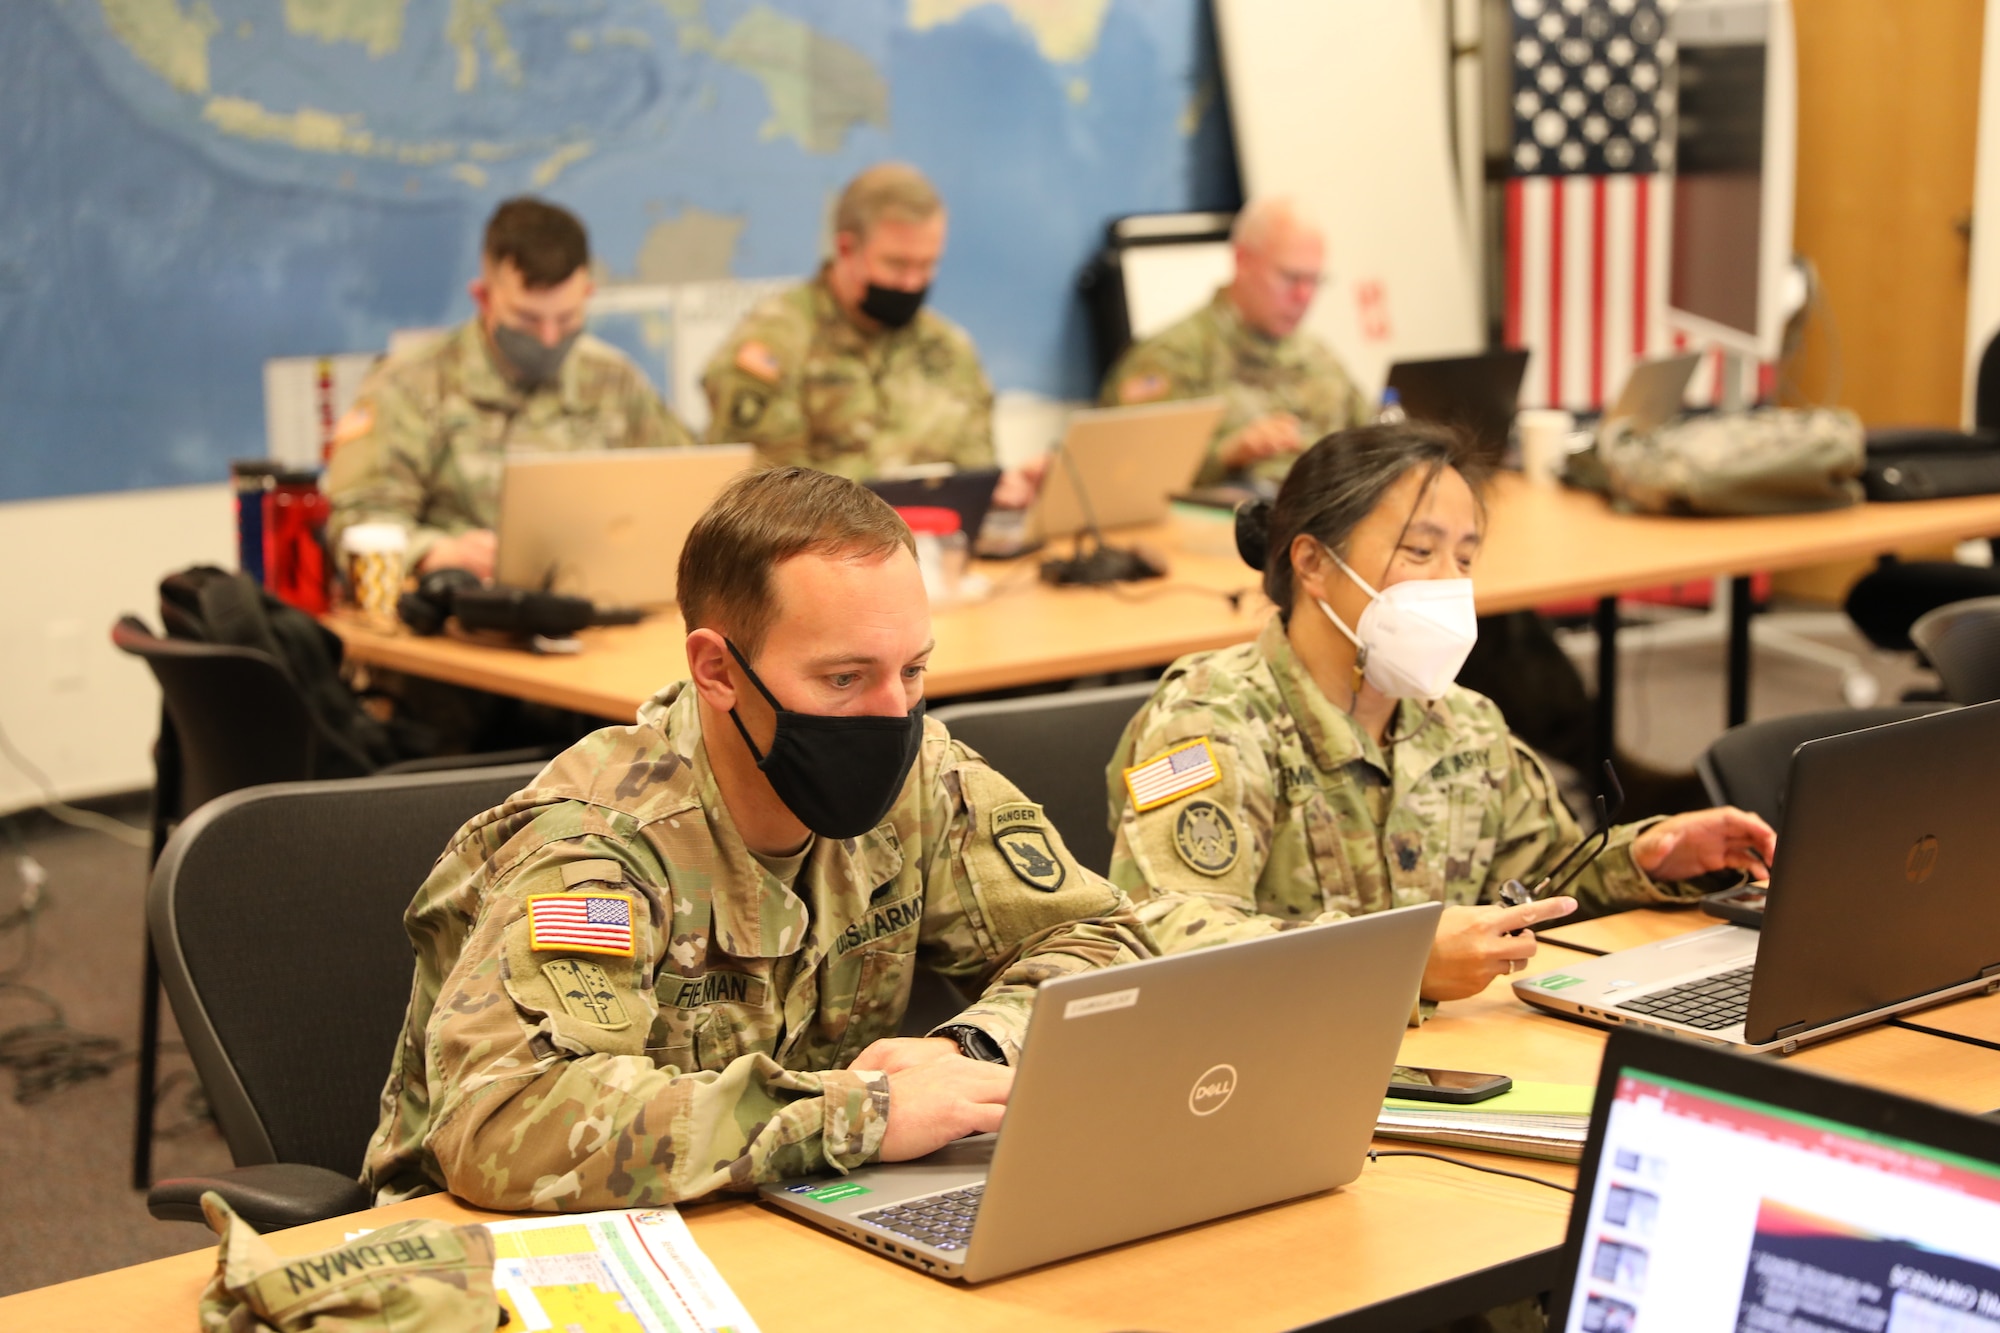 Washington Army National Guard Lt. Cols. Scott Fieldman and Reena Emme work virtually with their counterparts from the Malaysian Armed Forces during Exercise Bersama Warrior '21 from Joint Base Lewis McChord, Washington, Nov. 14, 2021.